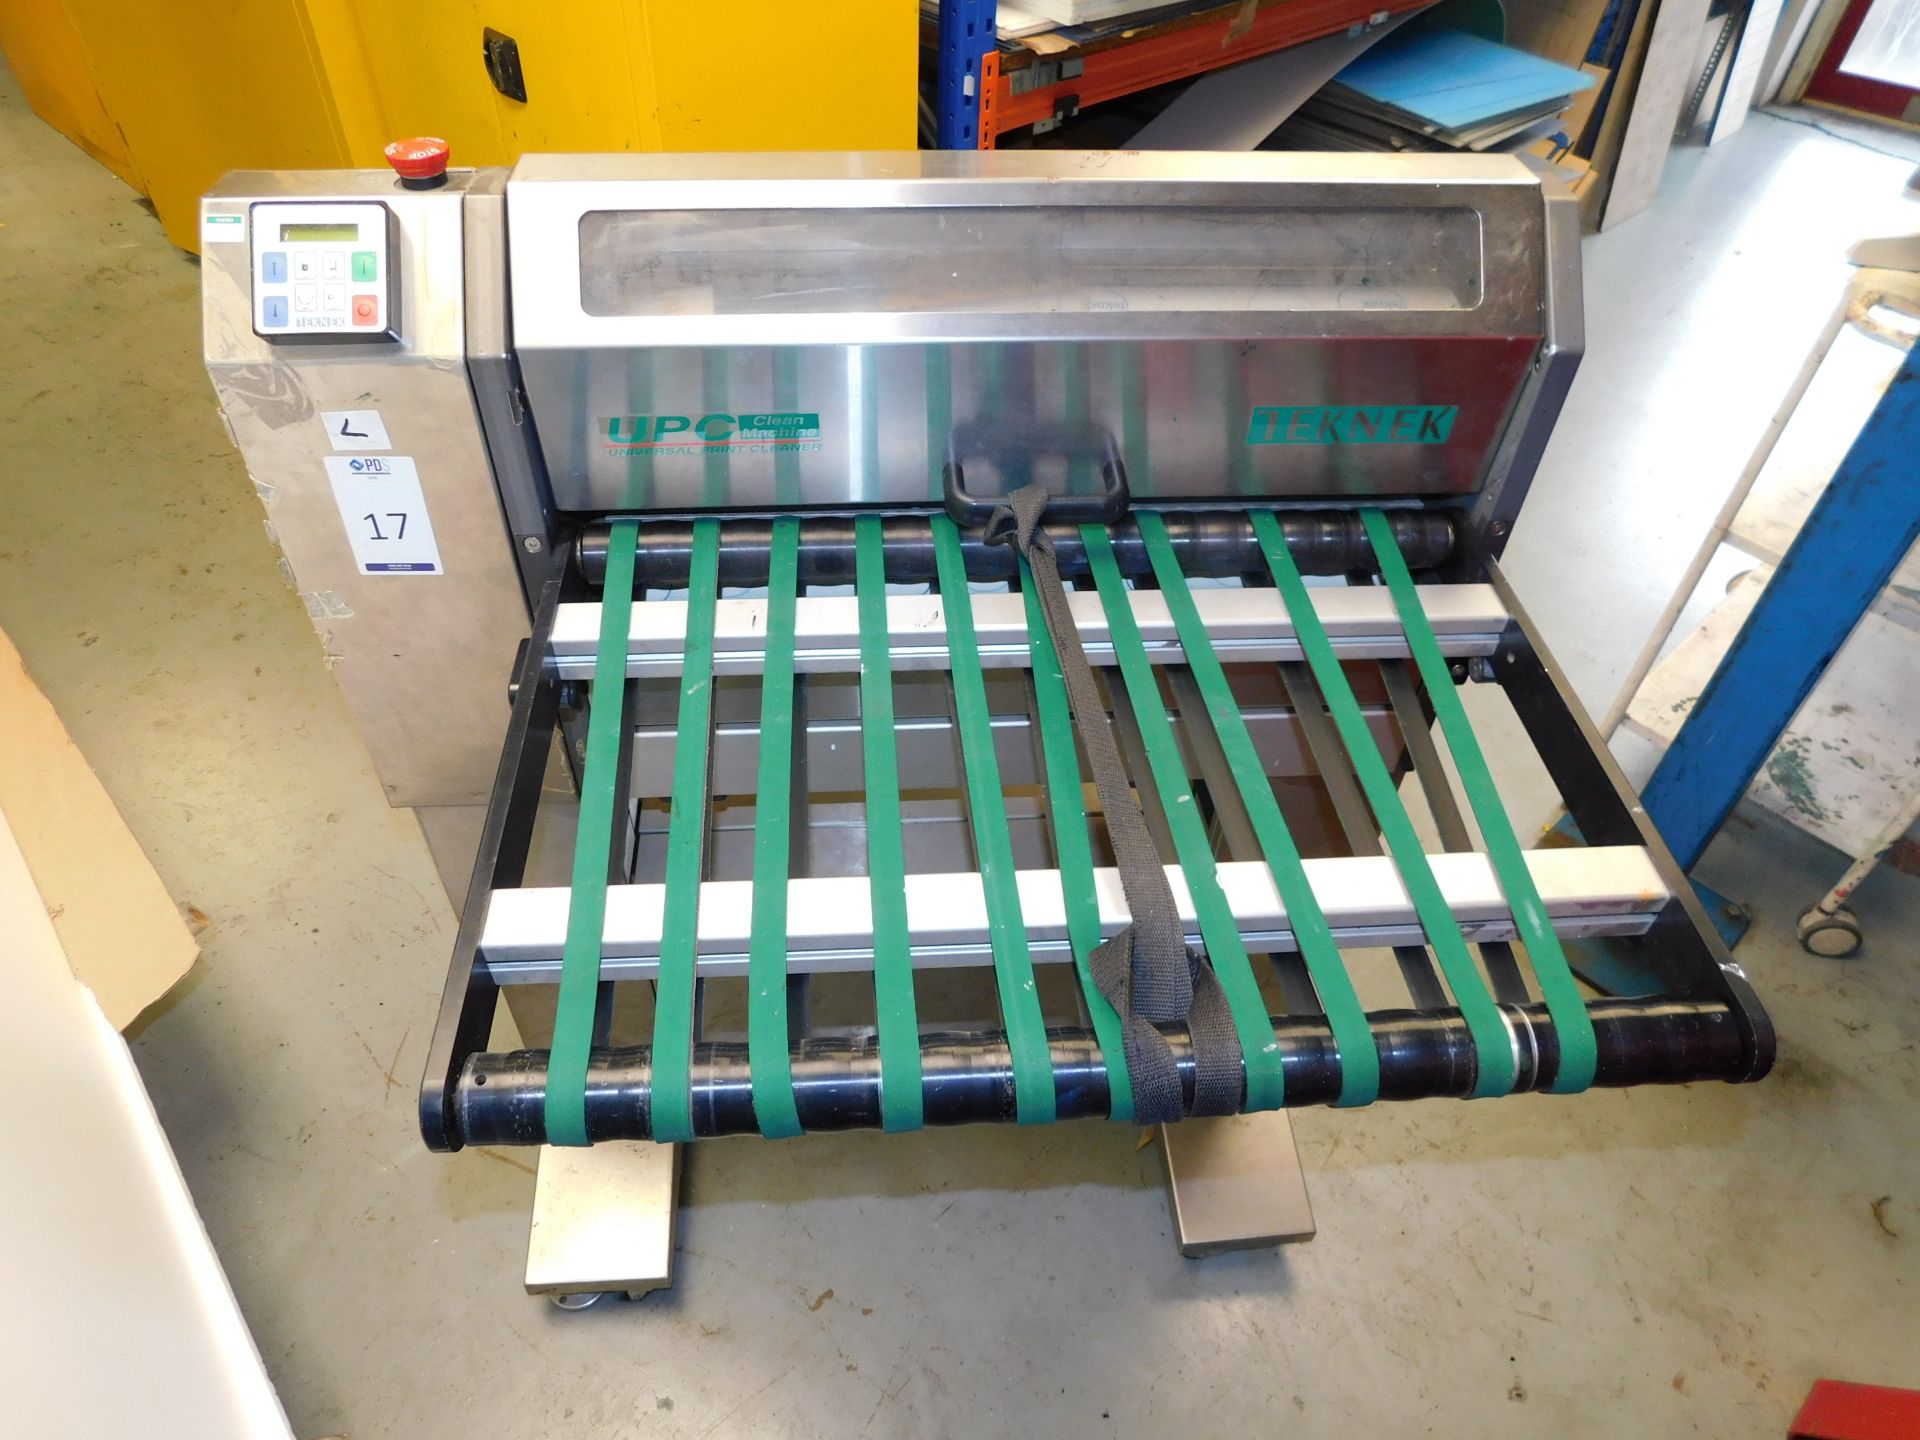 UPC Teknek 06000F3/230/50 Mobile Universal Print Cleaning Unit (2000), S/N 8748. (Located